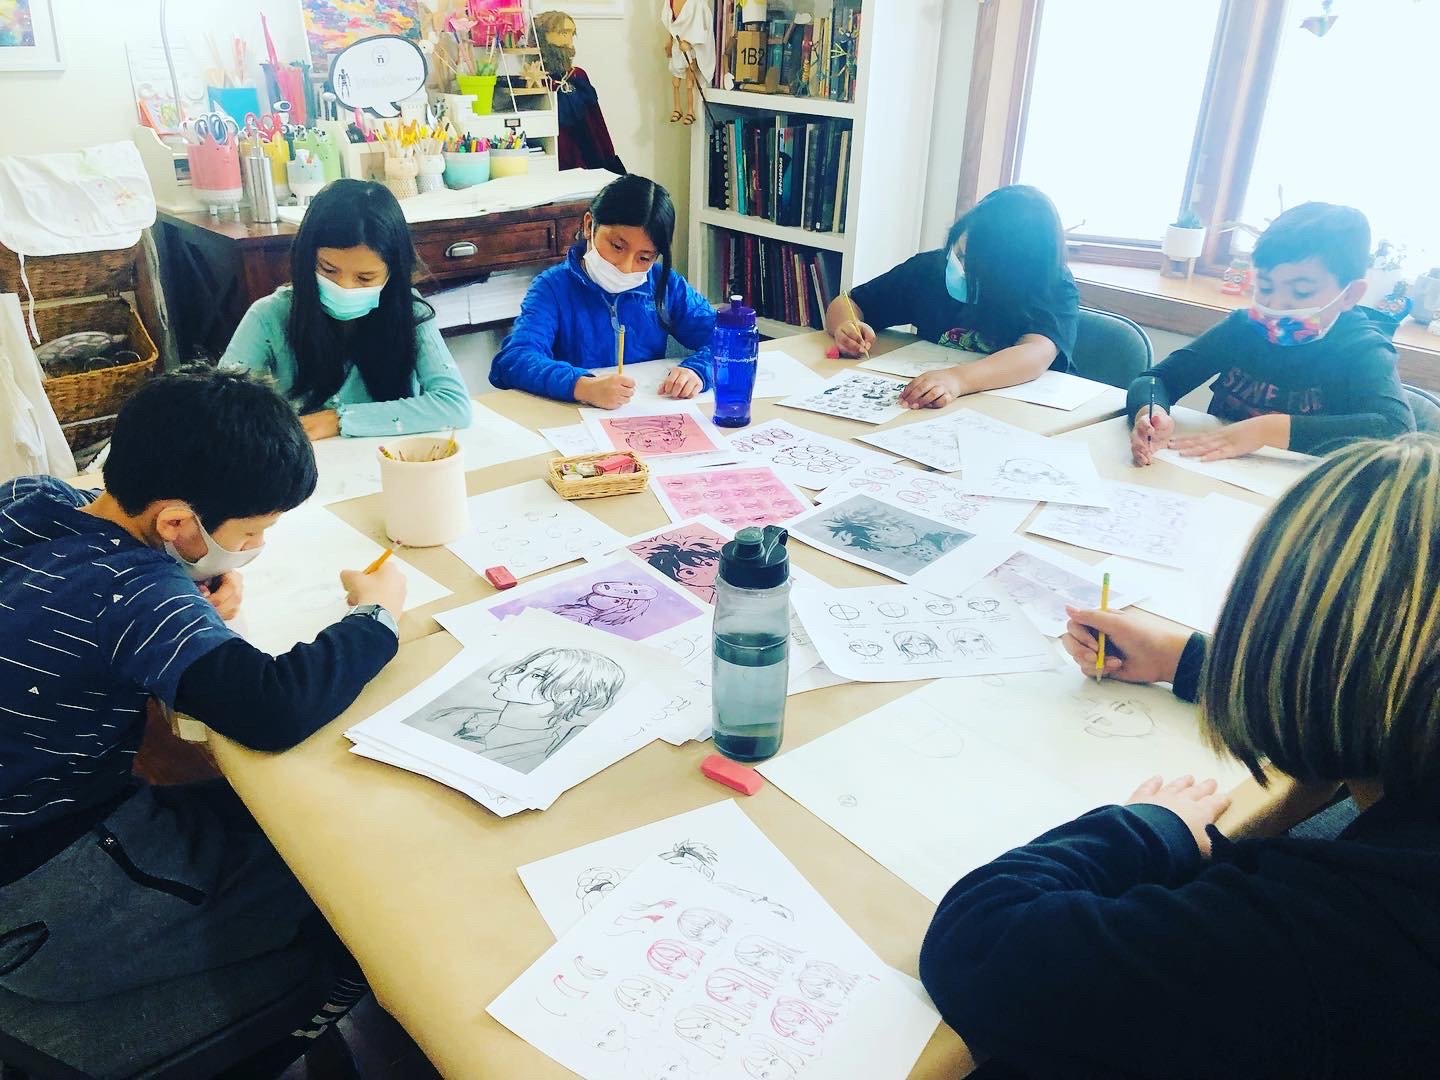 Five Reasons to Take an Art Class – Whether you are a grownup or a